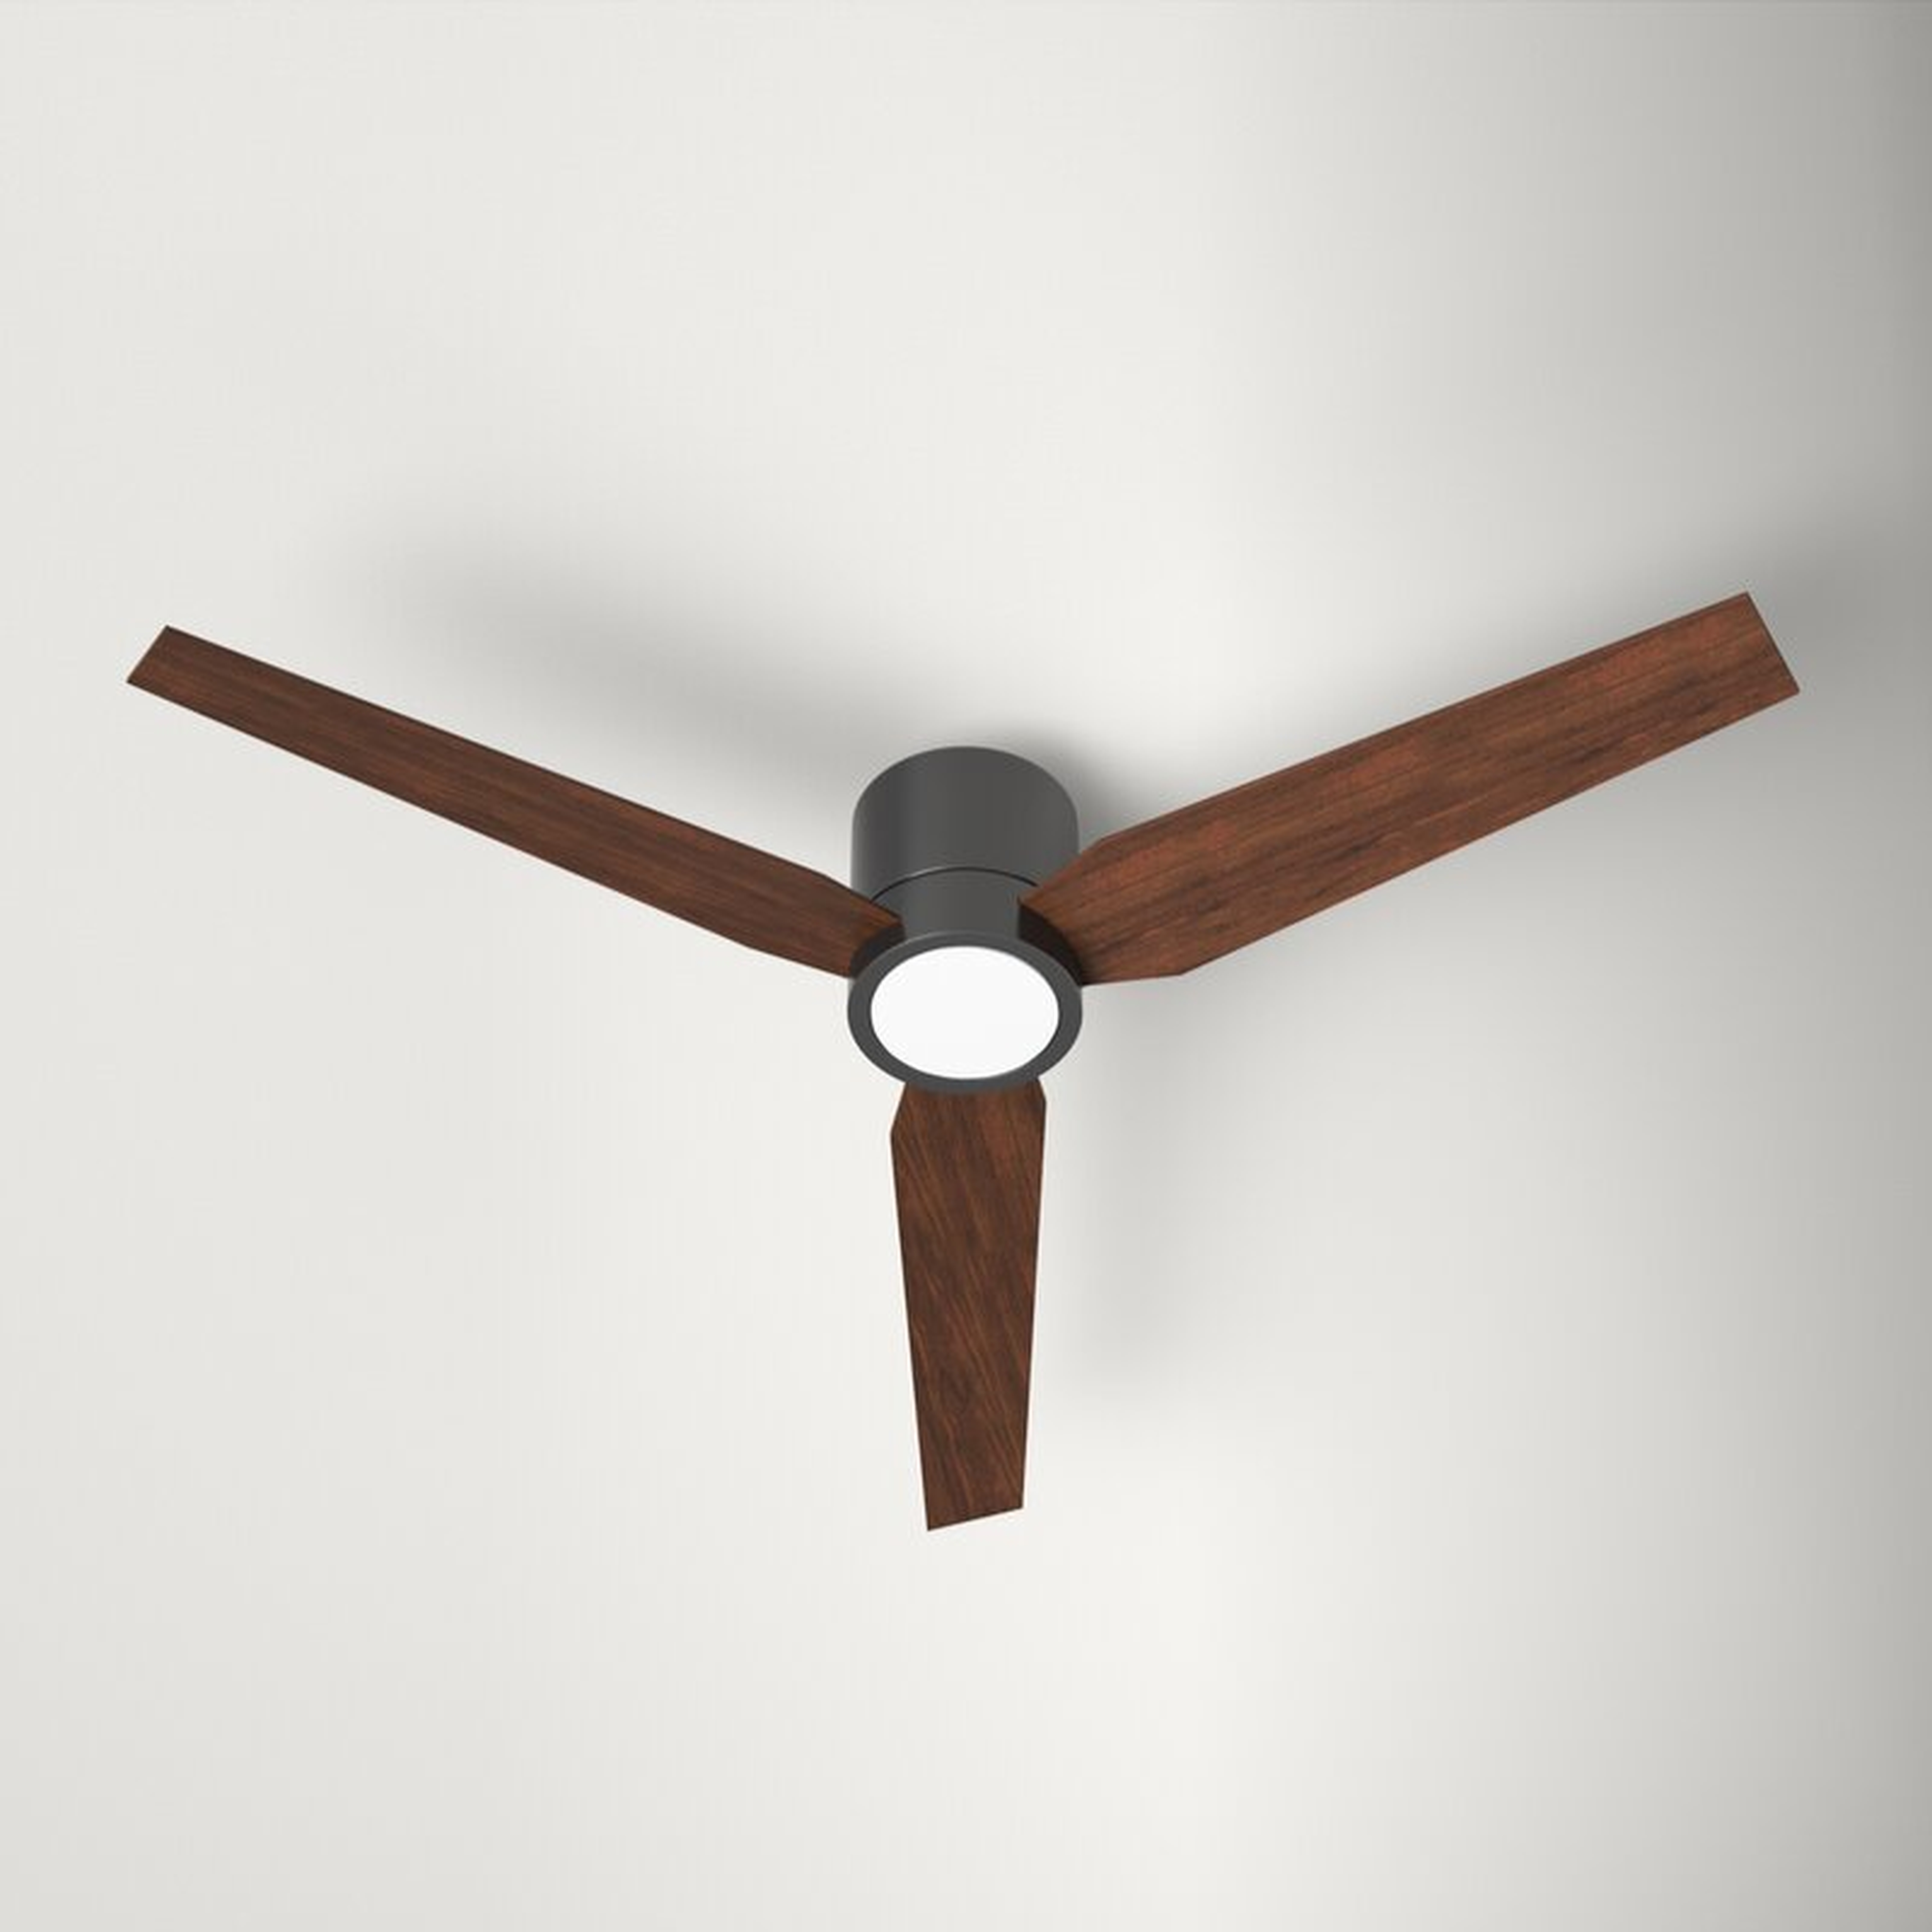 Goren 56" 3 - Blade LED Flush Mount Ceiling Fan with Remote Control and Light Kit Included - AllModern